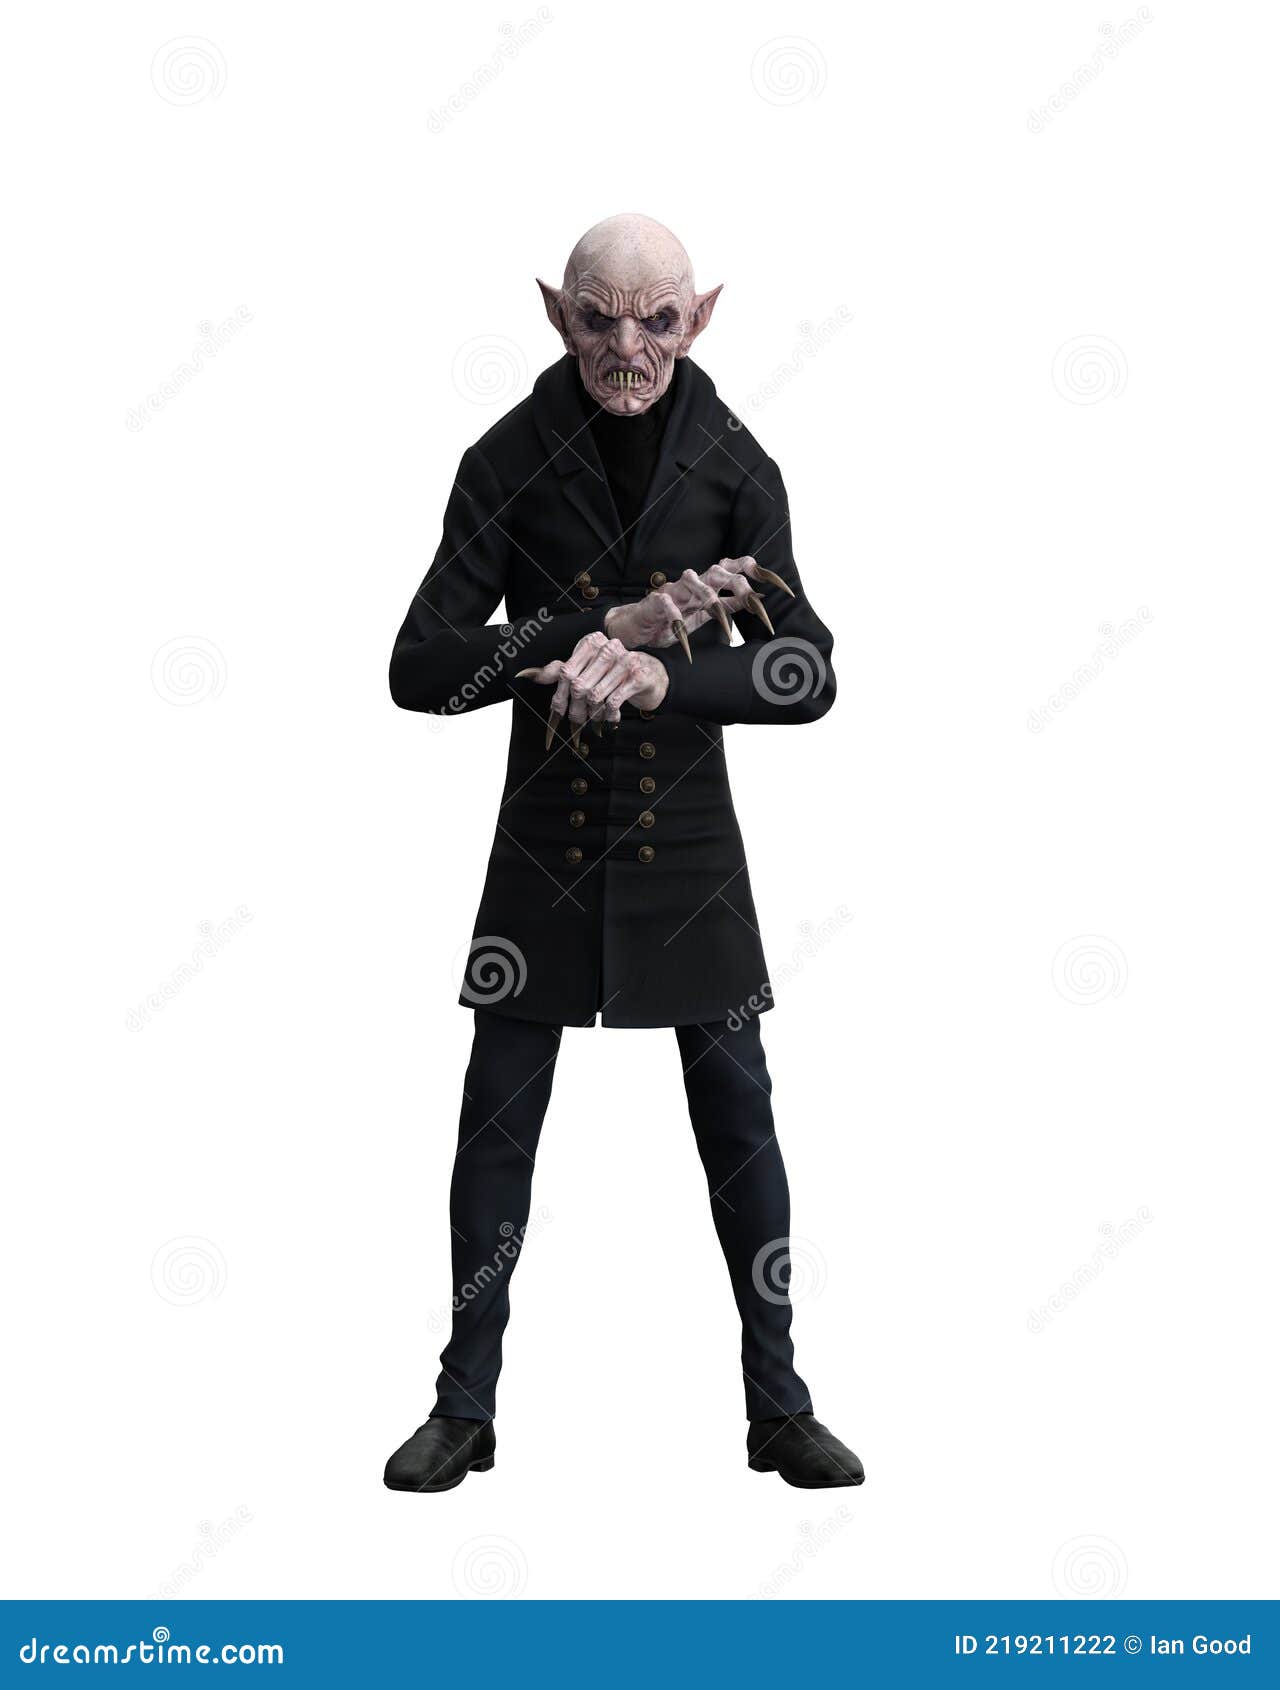 259,336 Vampire Images, Stock Photos, 3D objects, & Vectors